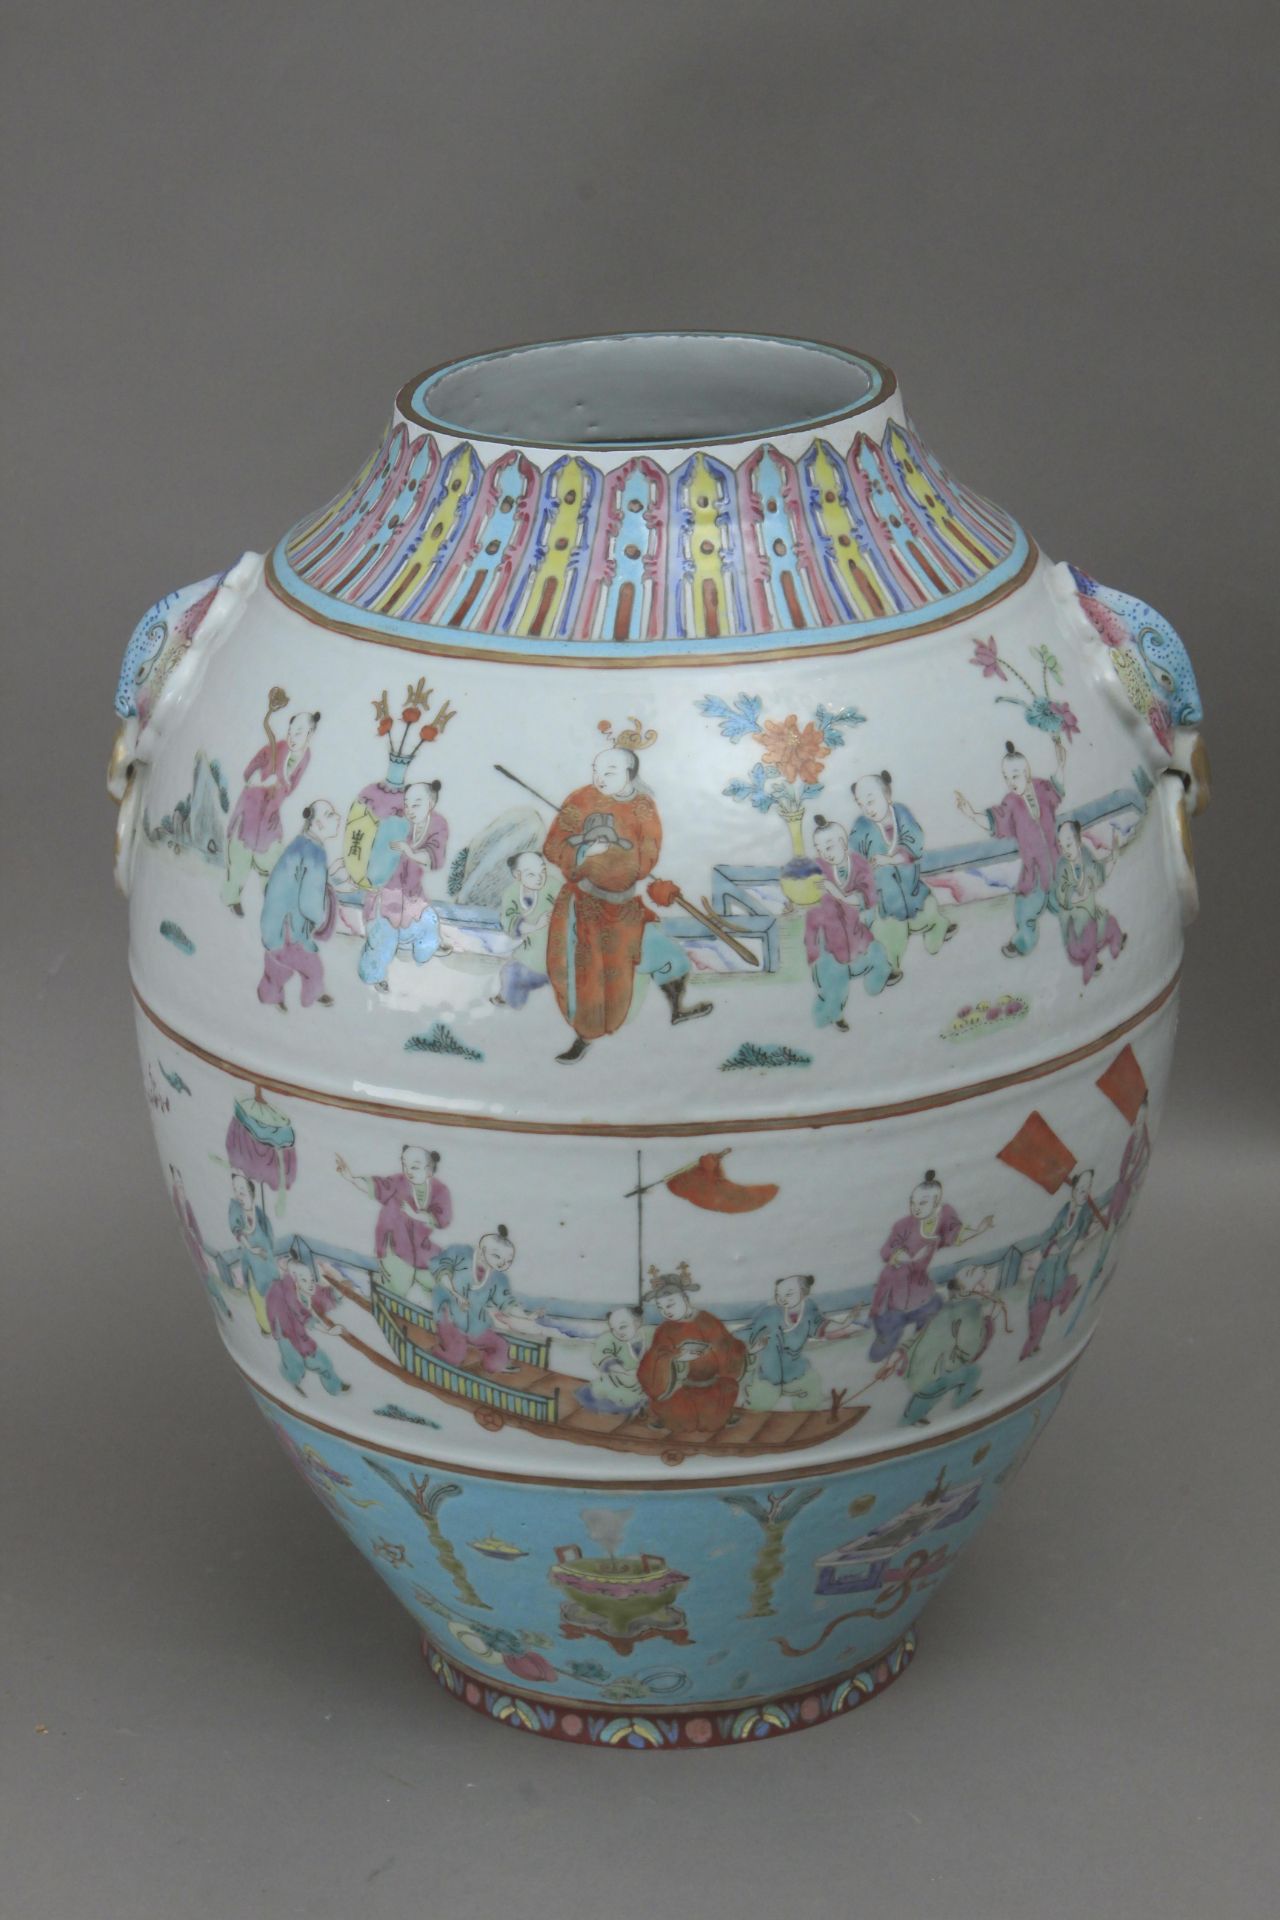 A 19th century Chinese vase from Qing dynasty in Canton porcelain